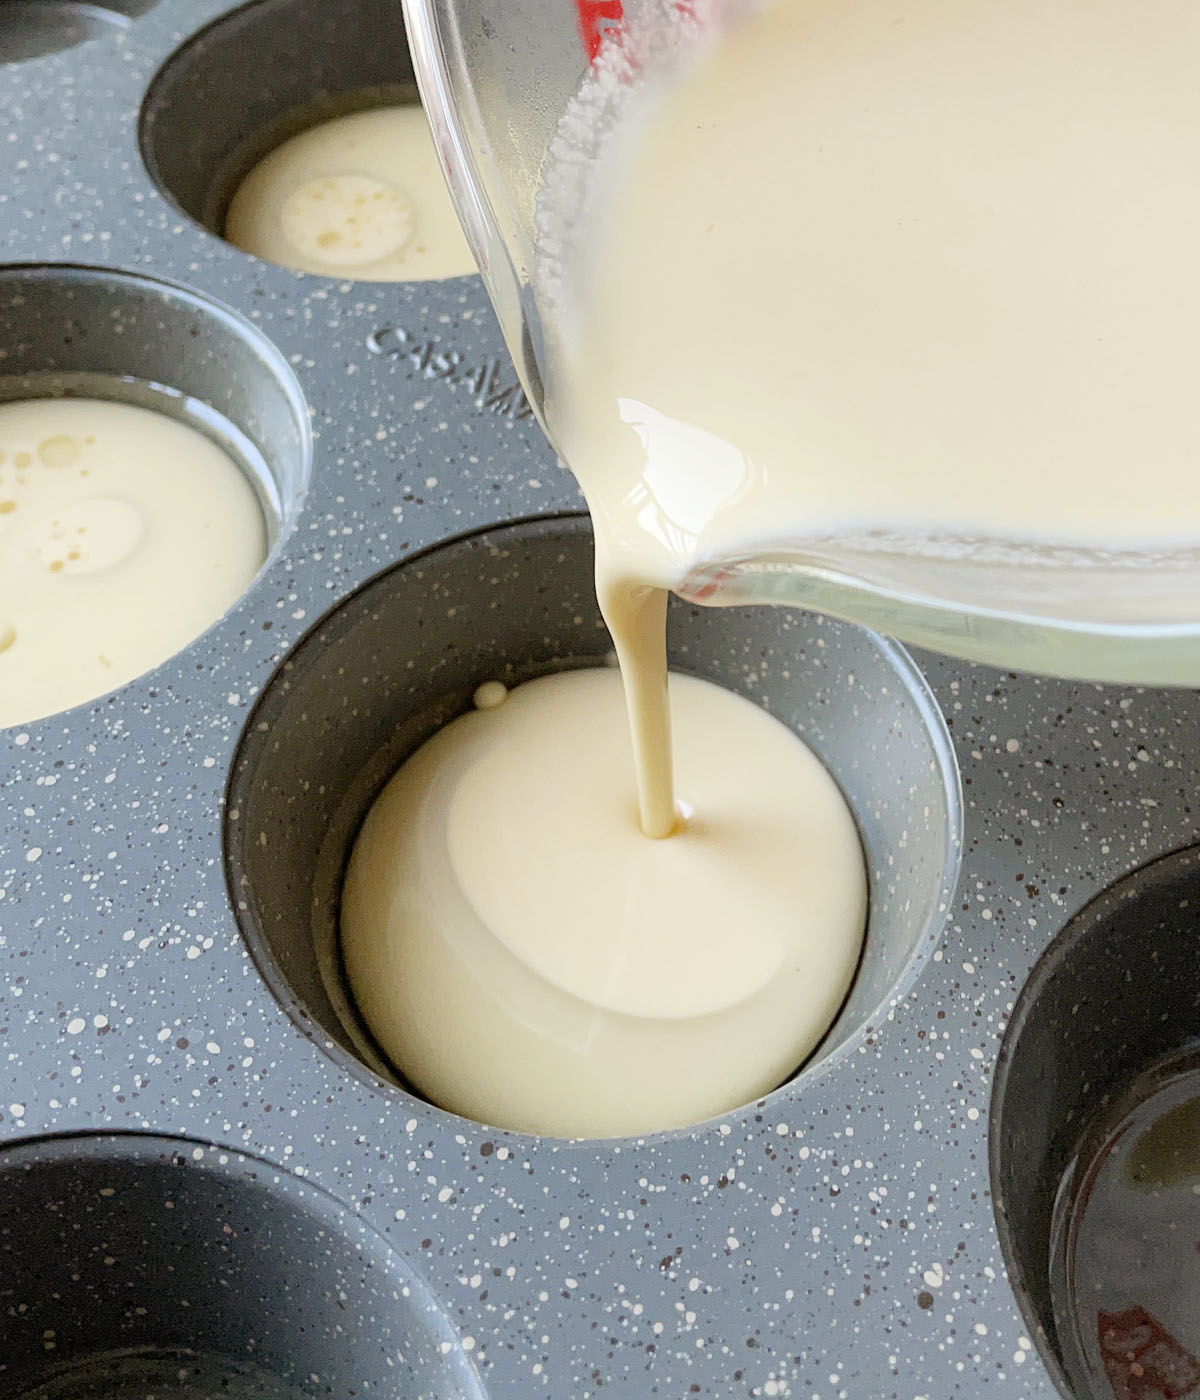 A light yellow liquid batter being poured into a metal muffin tin.